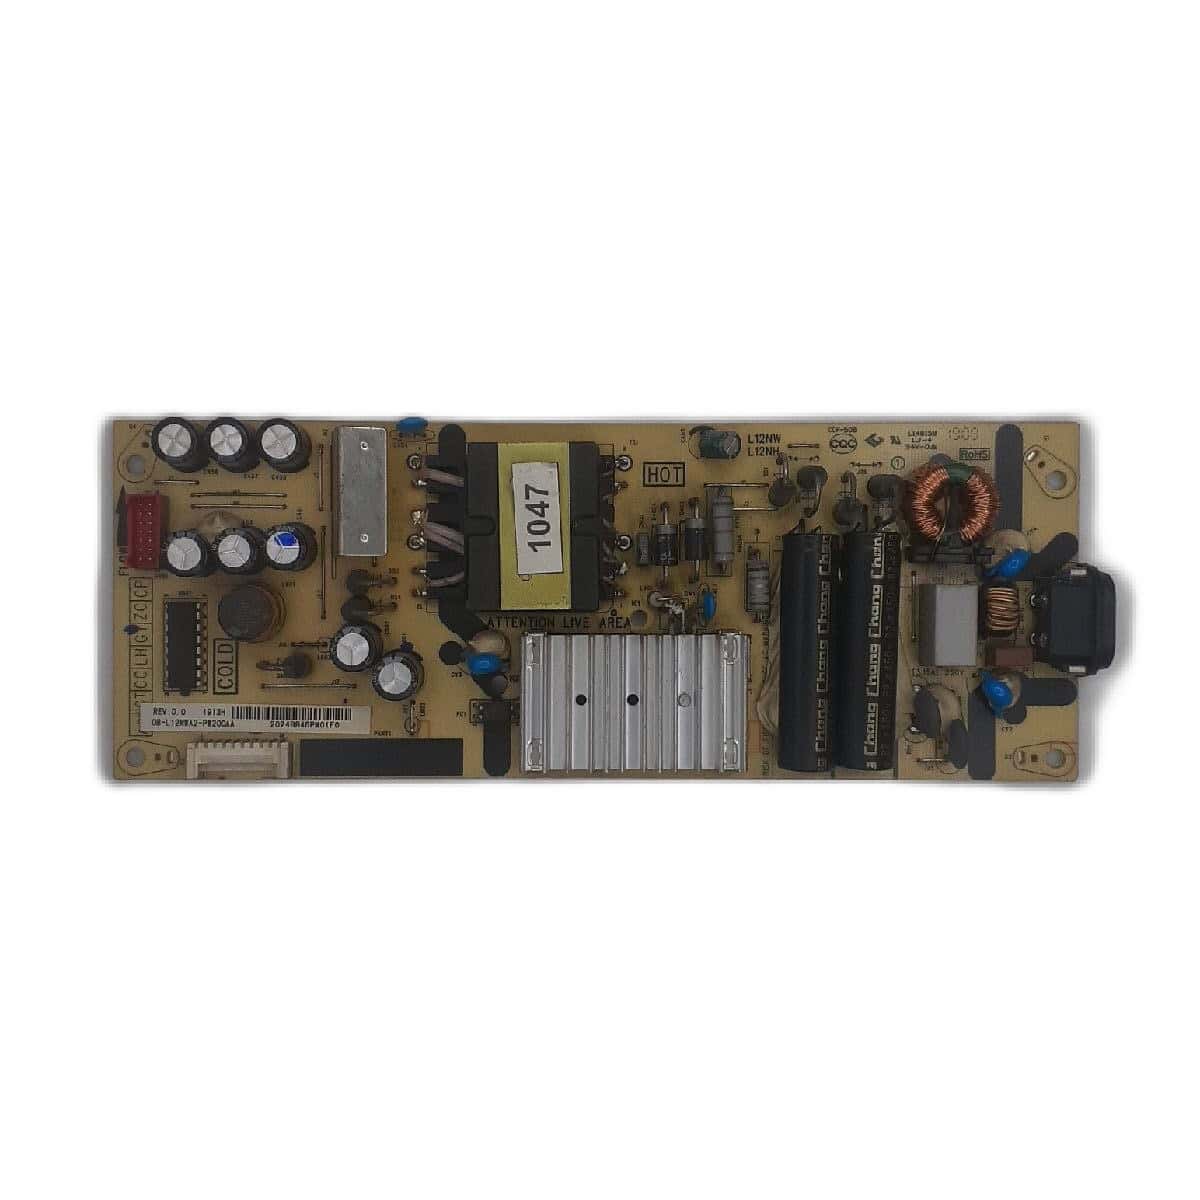 55G500 TCL POWER SUPPLY BOARD FOR LED TV